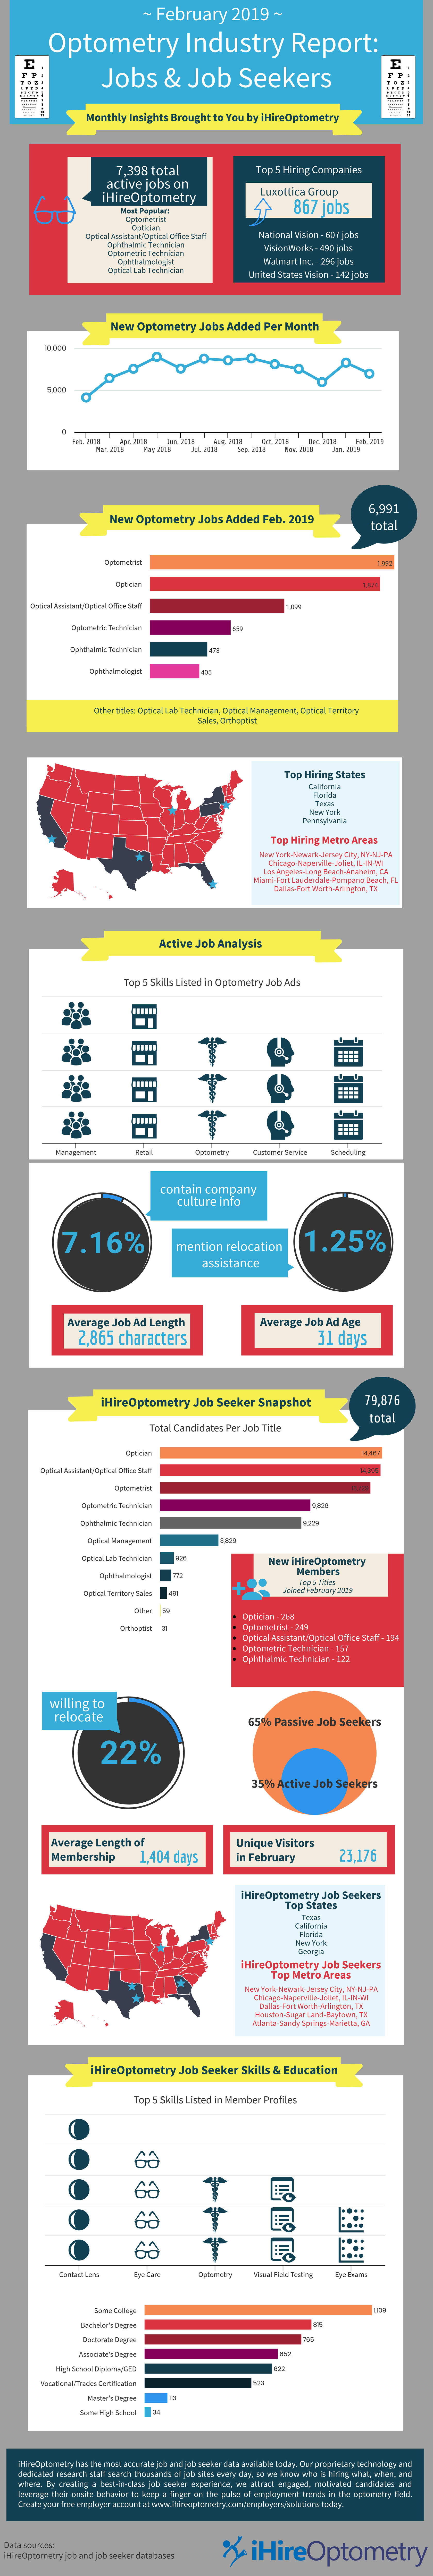 iHireOptometry’s eye care industry overview for February 2019. Infographic.